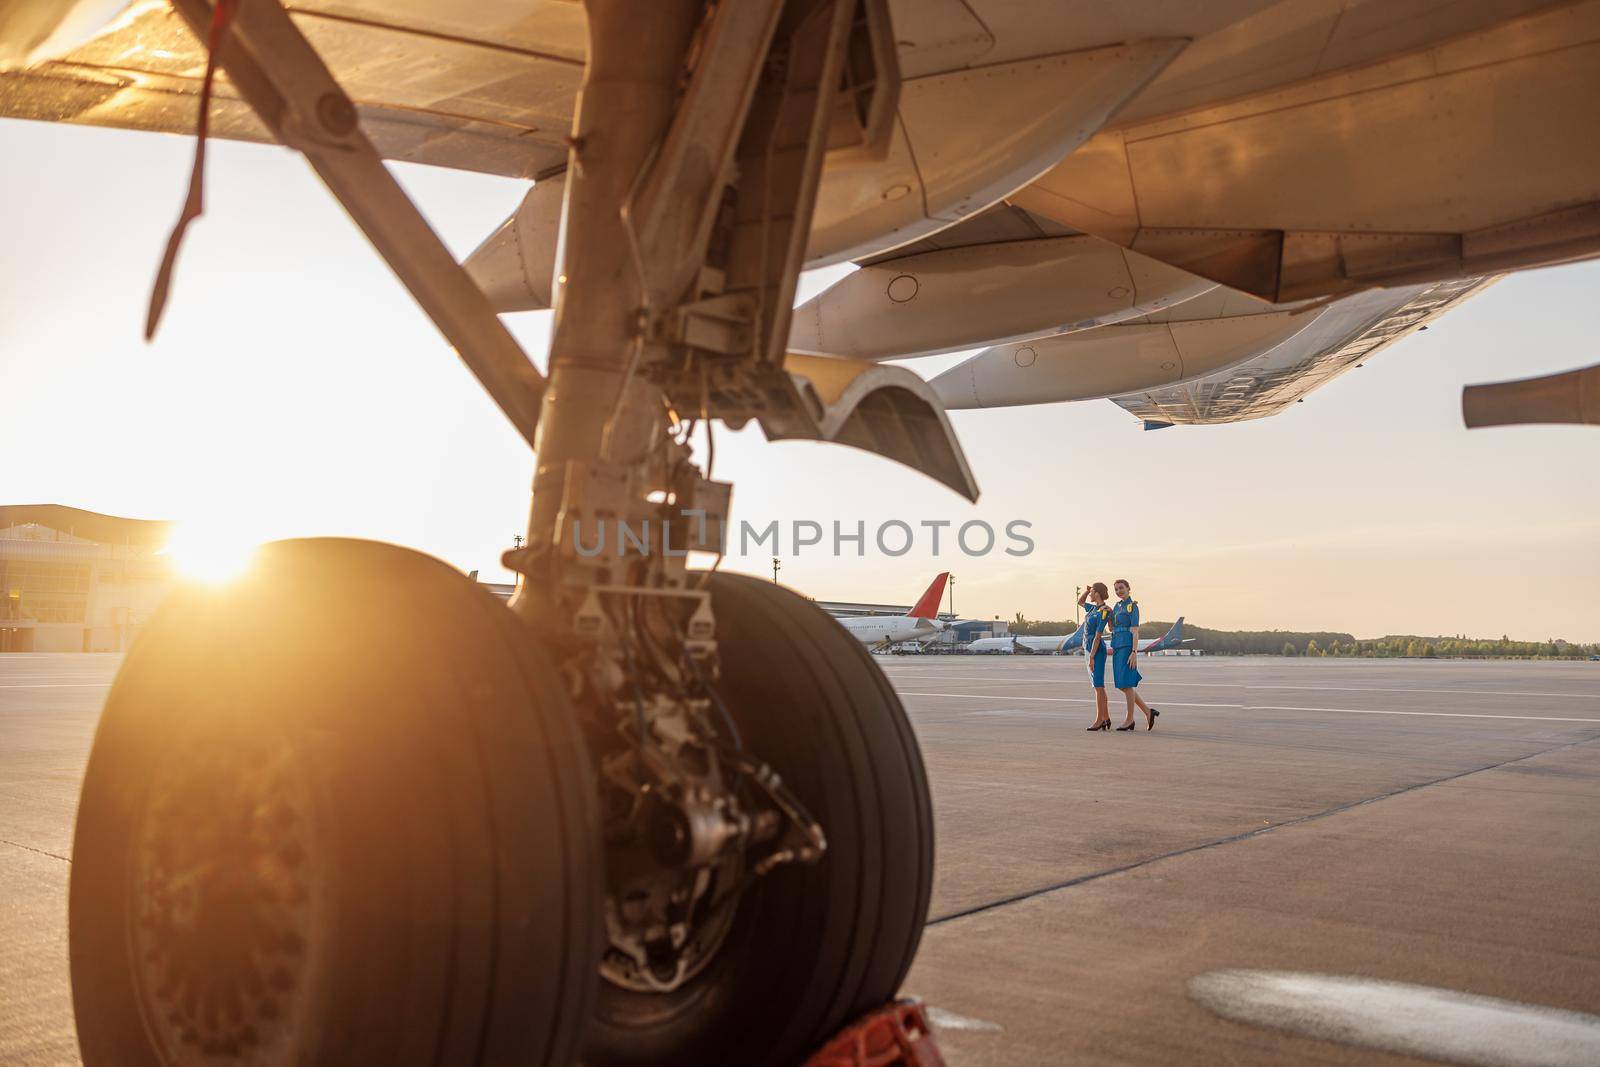 Professional male pilot posing for photoshoot together with two air hostesses in blue uniform, standing in an airport terminal at sunset by Yaroslav_astakhov